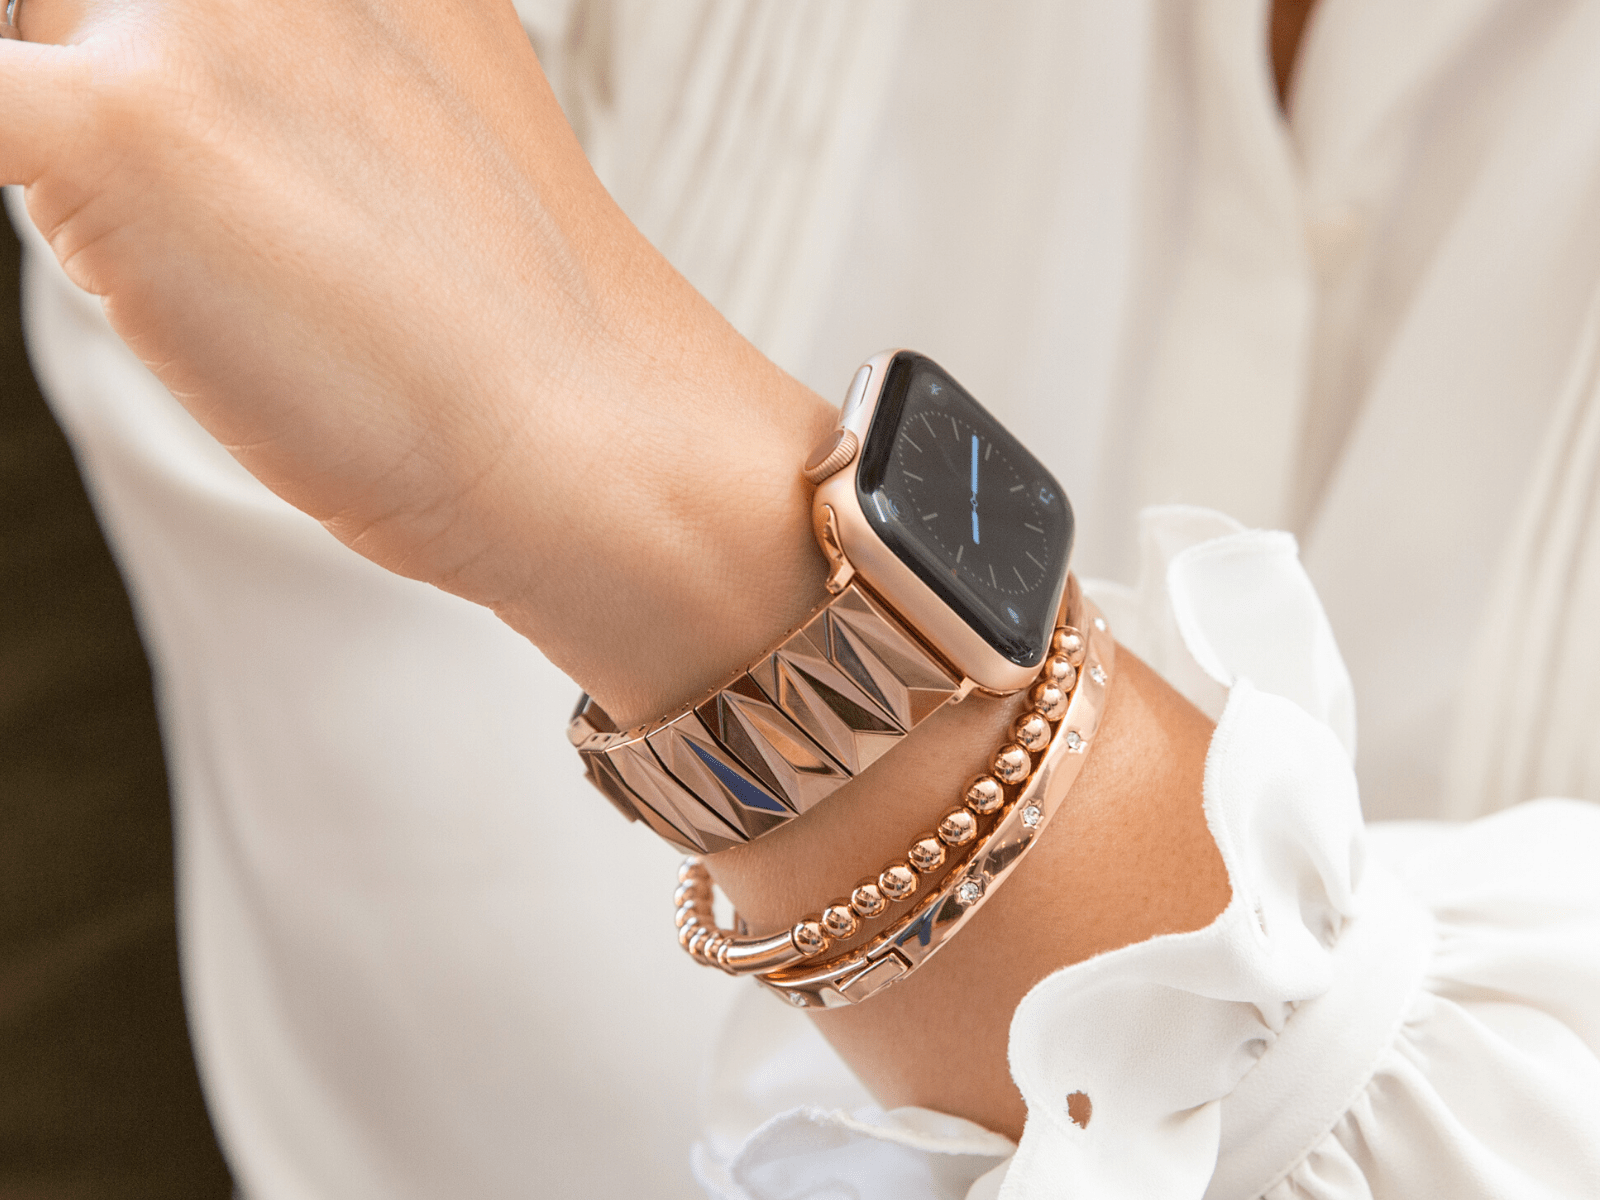 Pyramid Band for the Apple Watch - Goldenerre Women's Apple Watch Bands and Jewelry